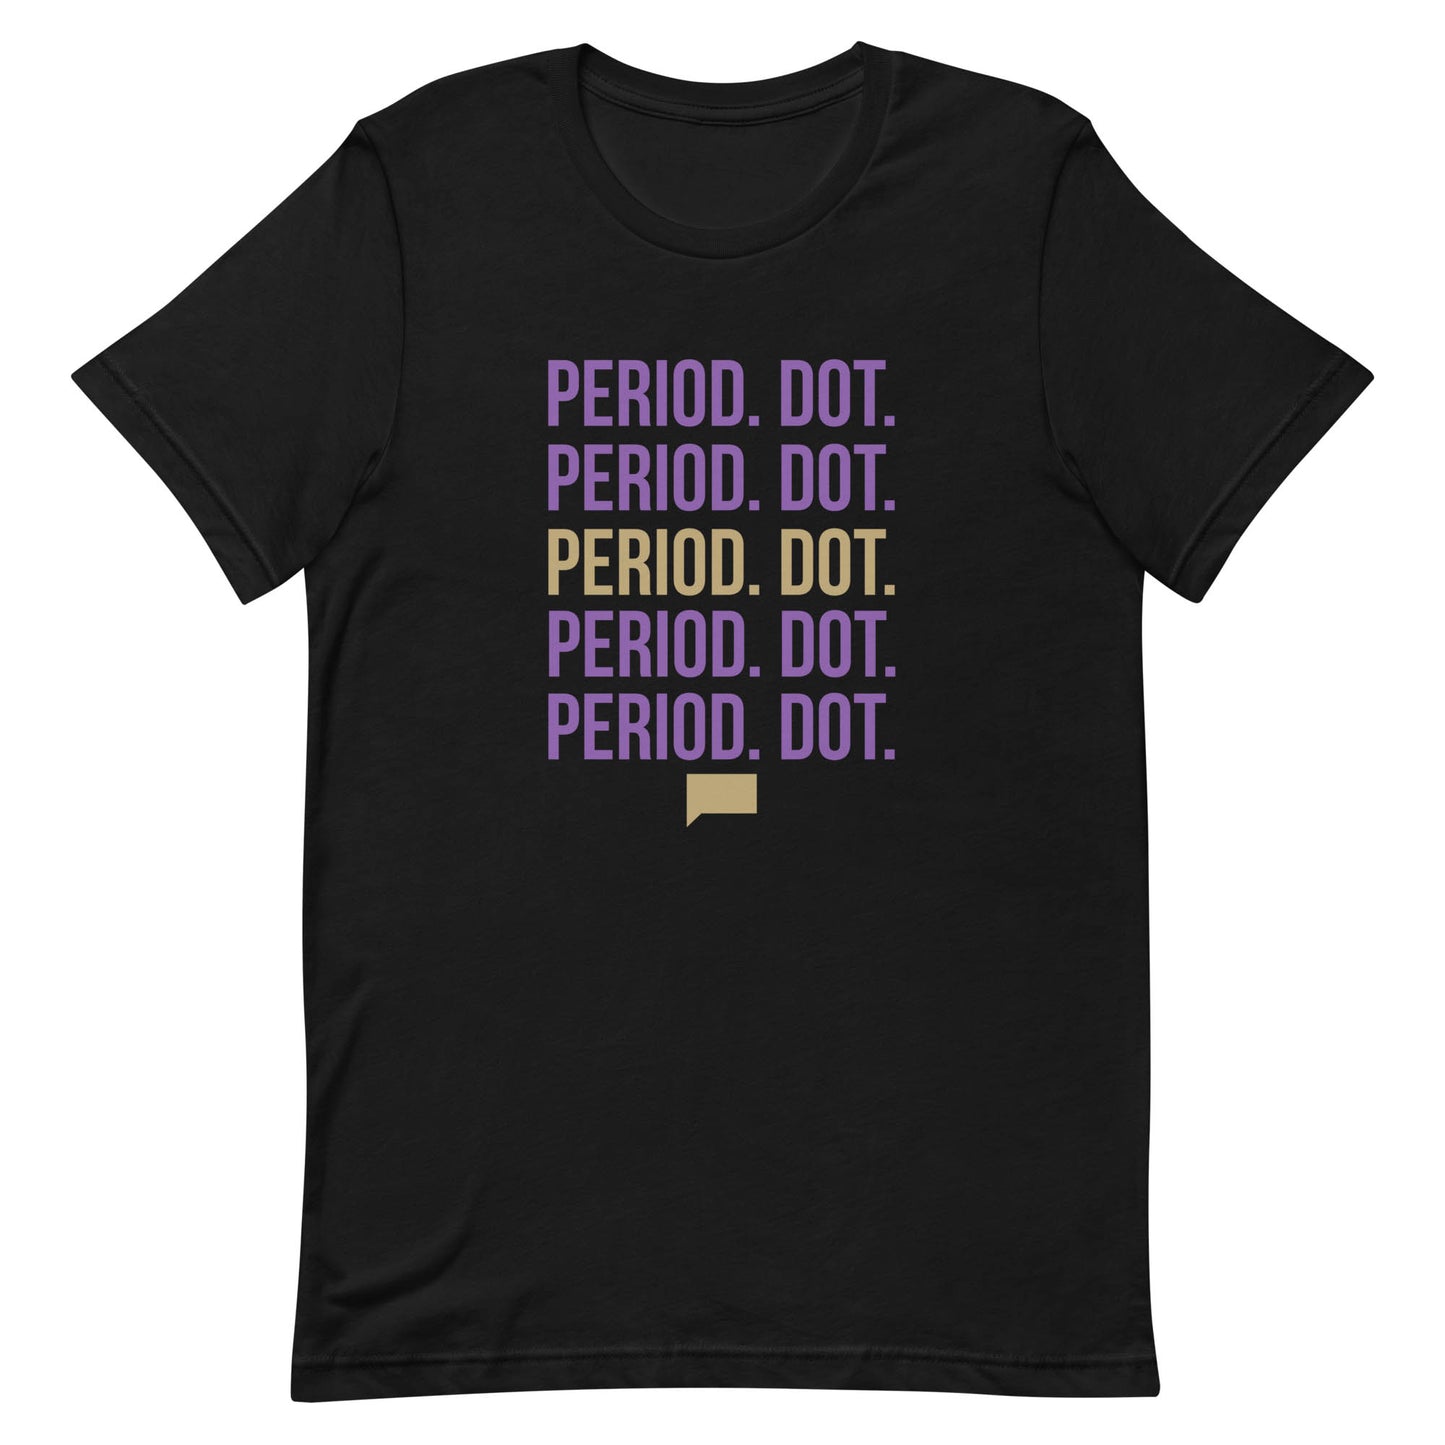 The Real Housewives of Dubai Period. Dot. Repeated T-Shirt